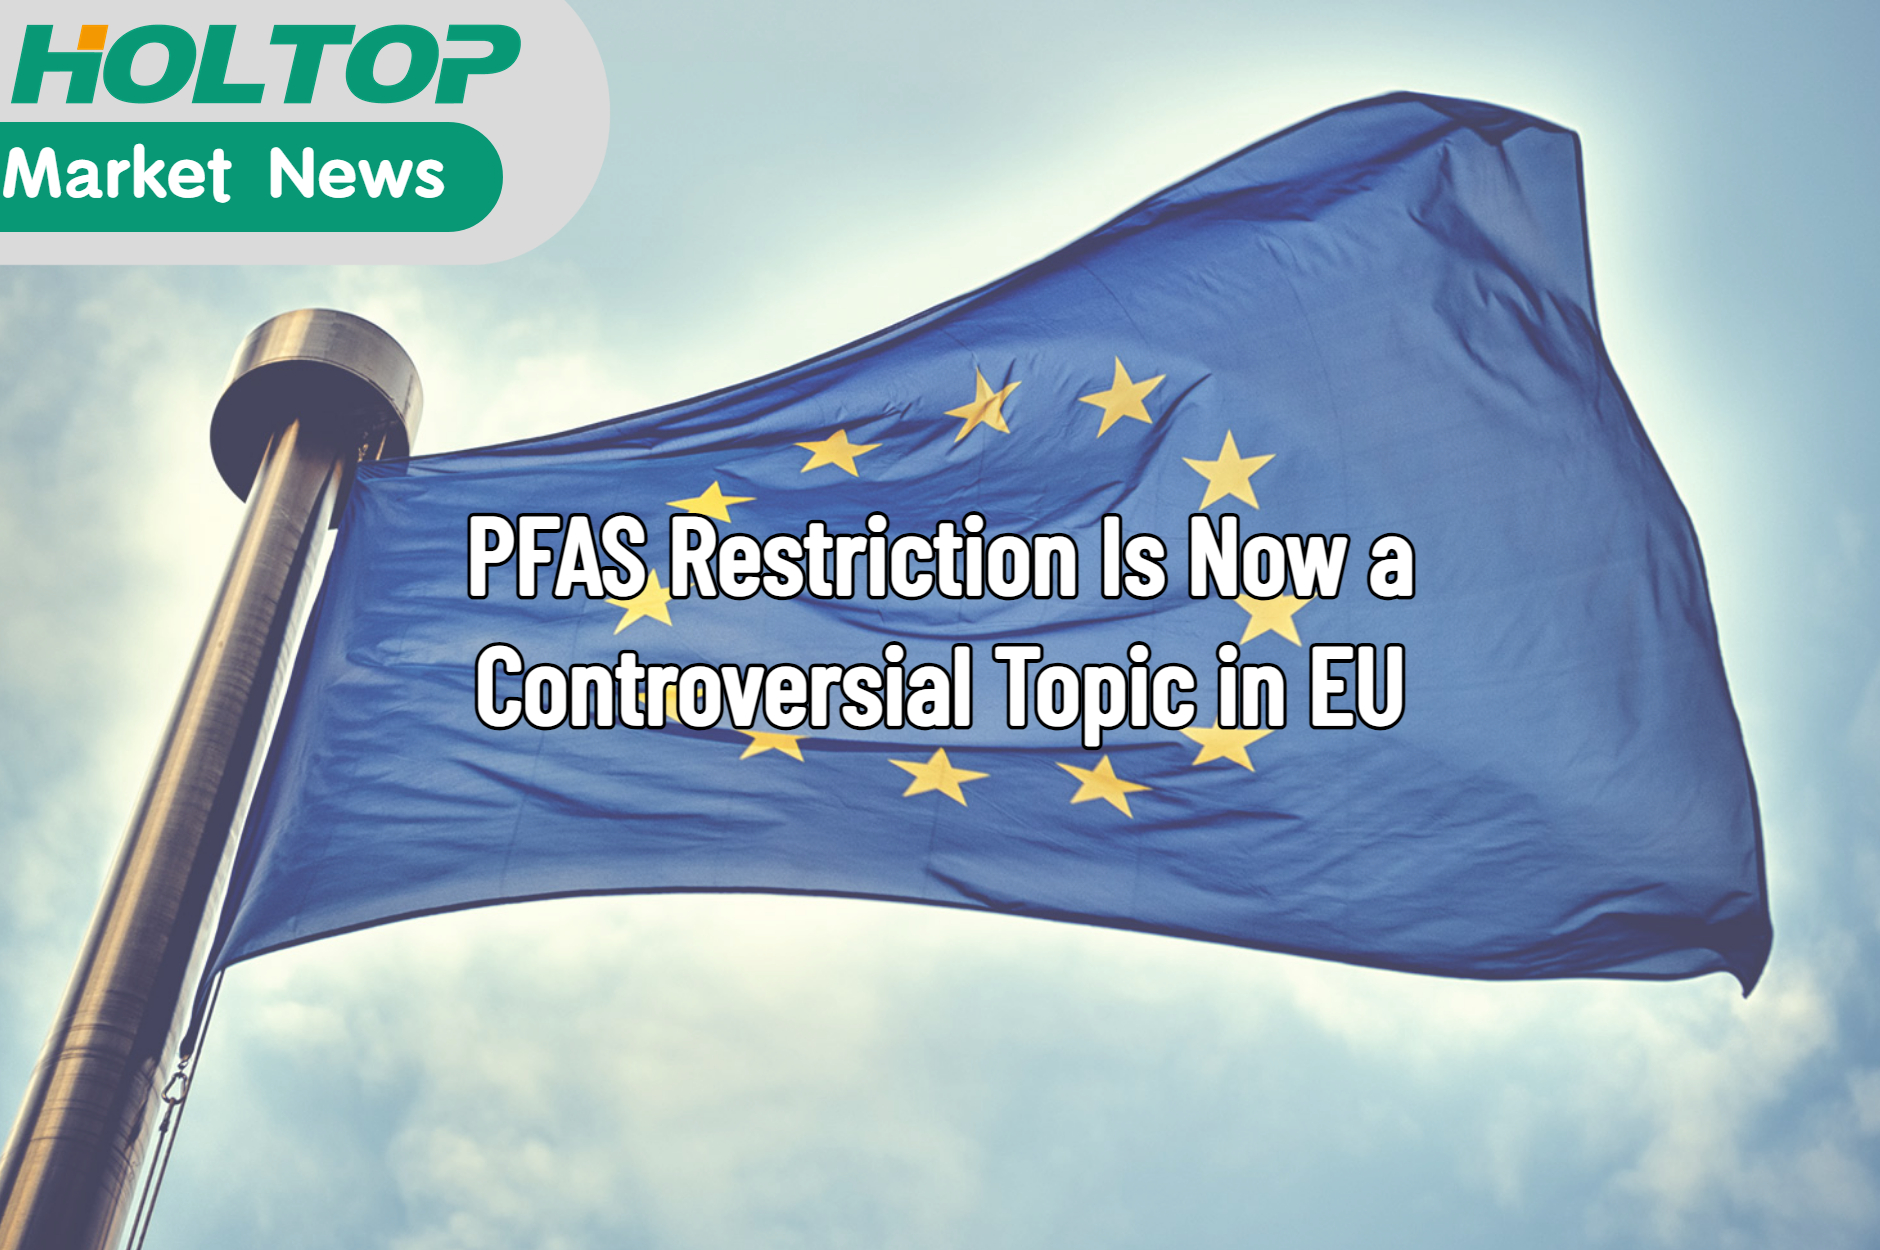 PFAS Restriction Is Now a Controversial Topic in EU